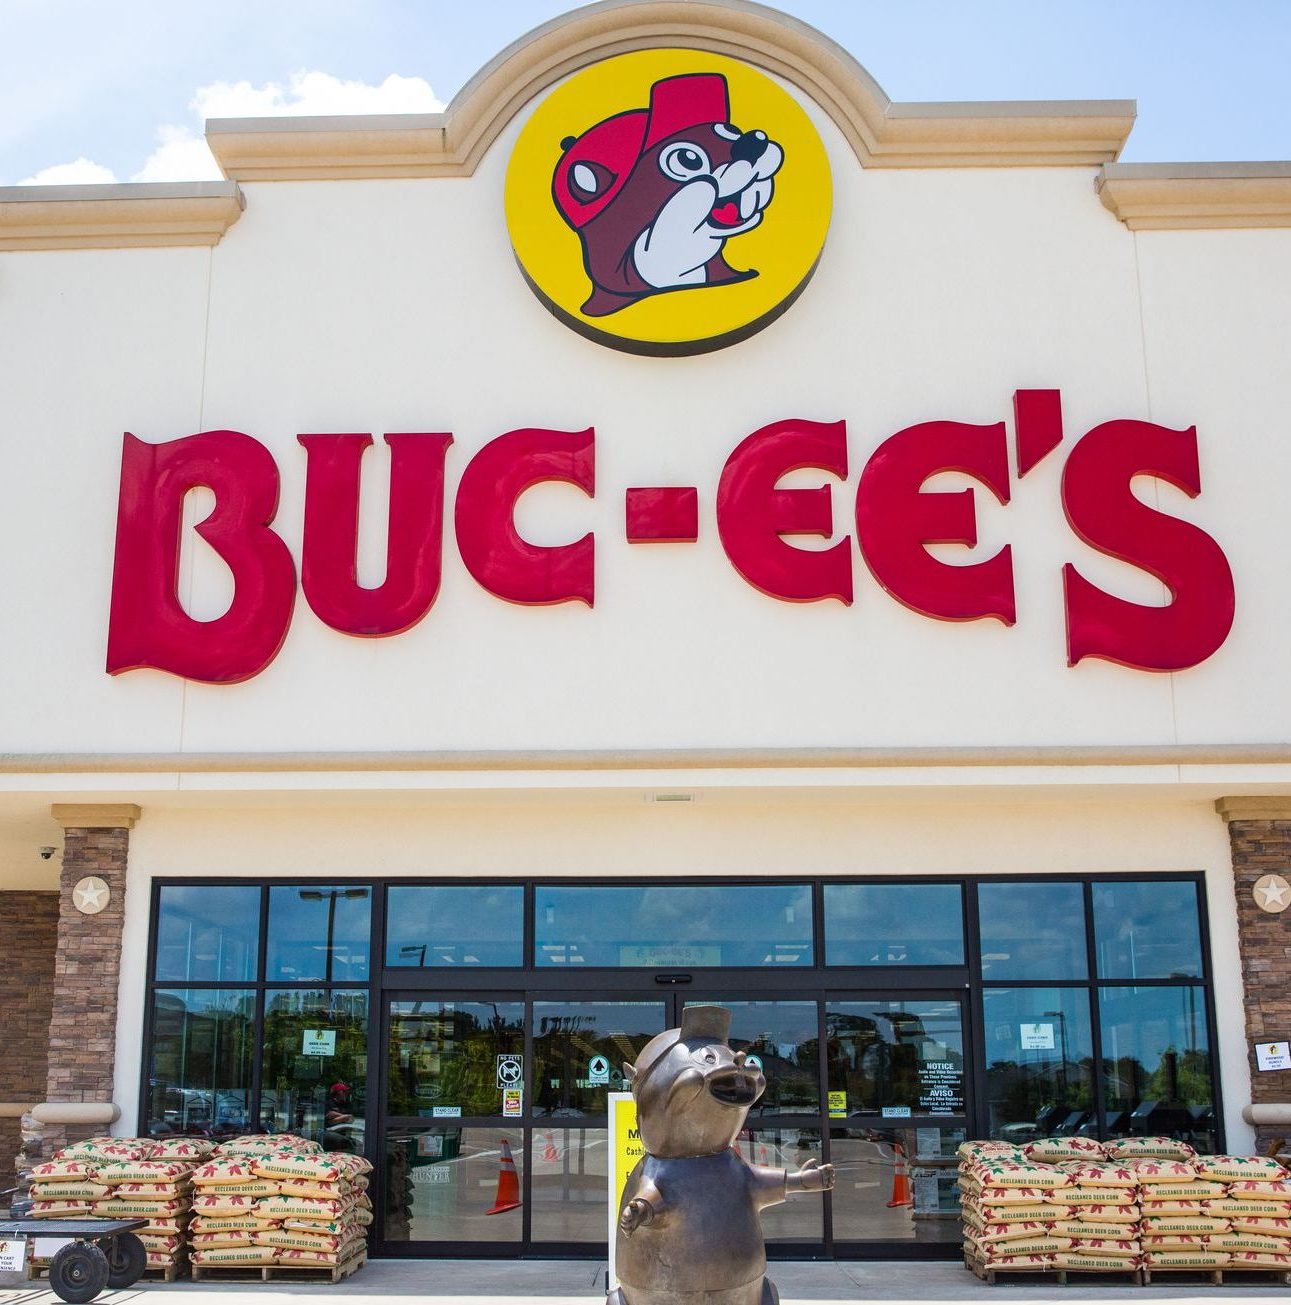 buc-ees beaver convenience store